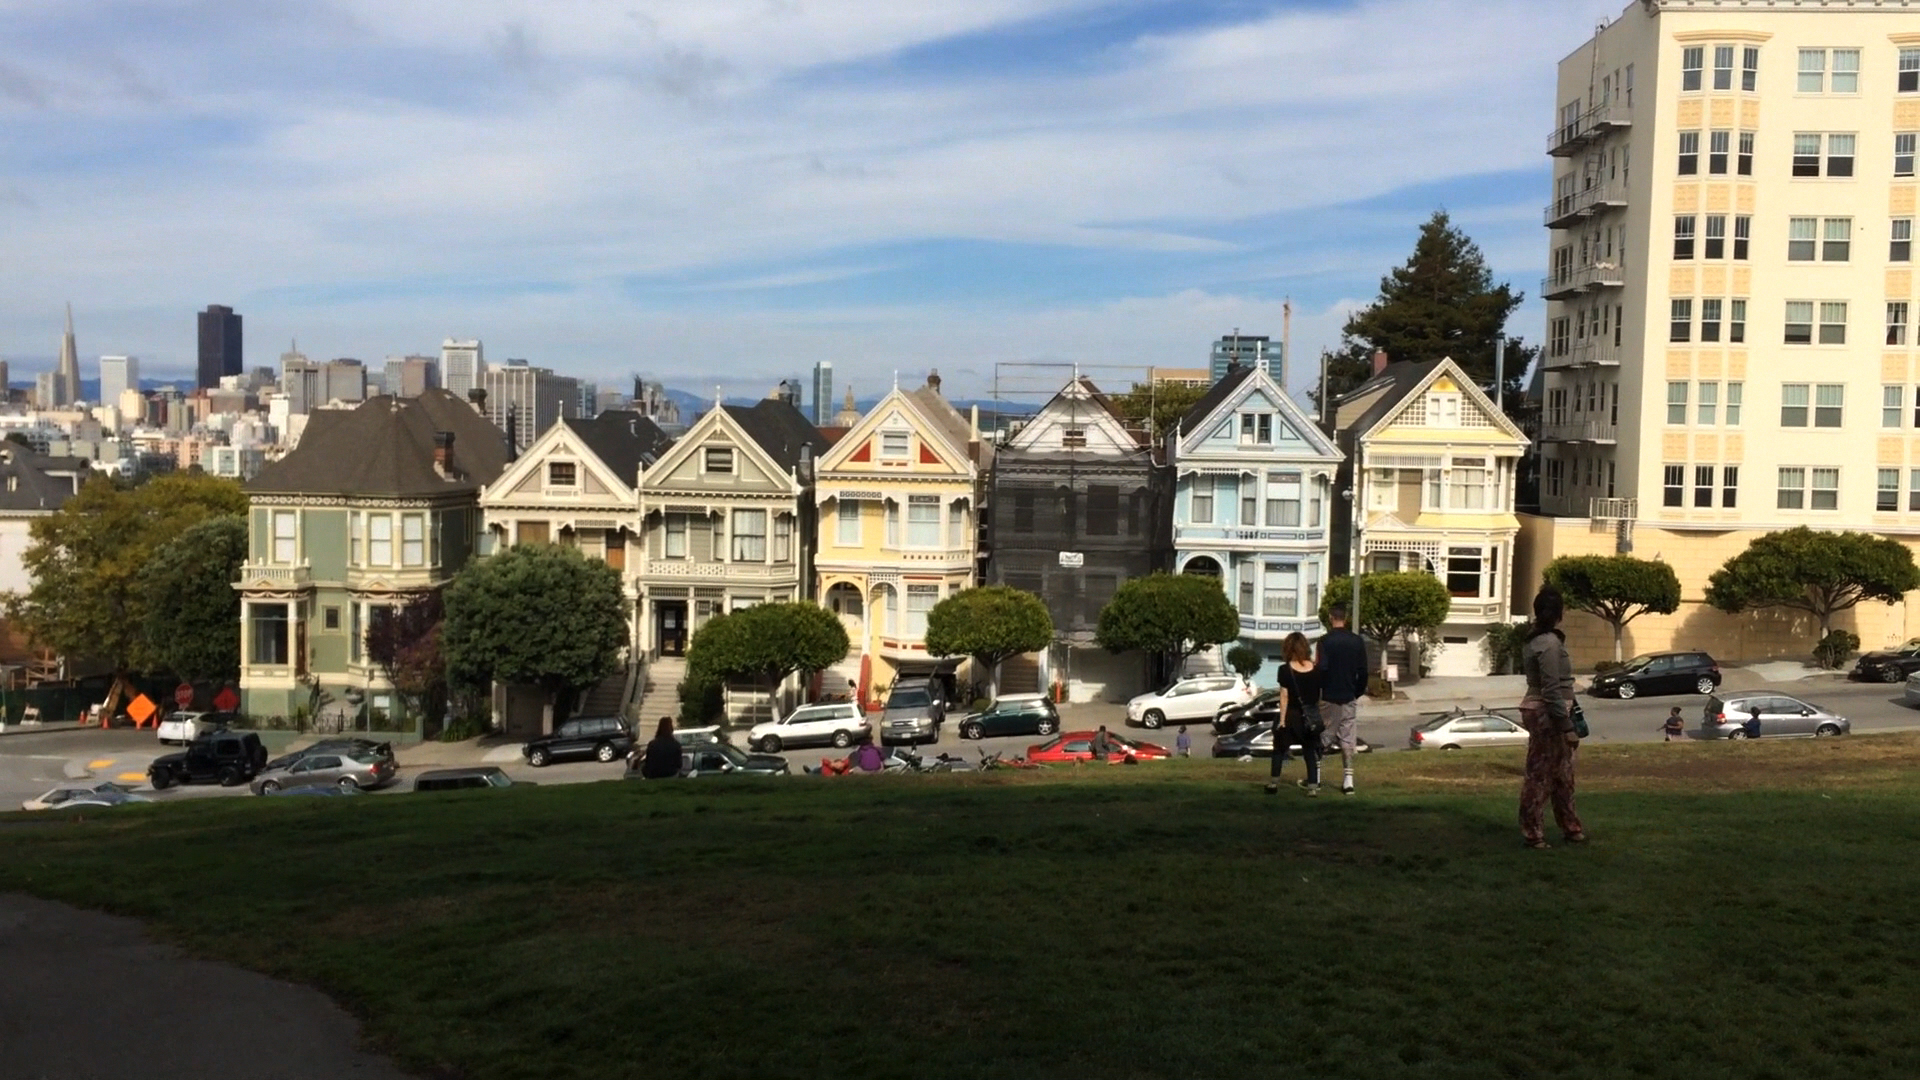 On the Road with Libby O'Connell: Alamo Square, San Francisco